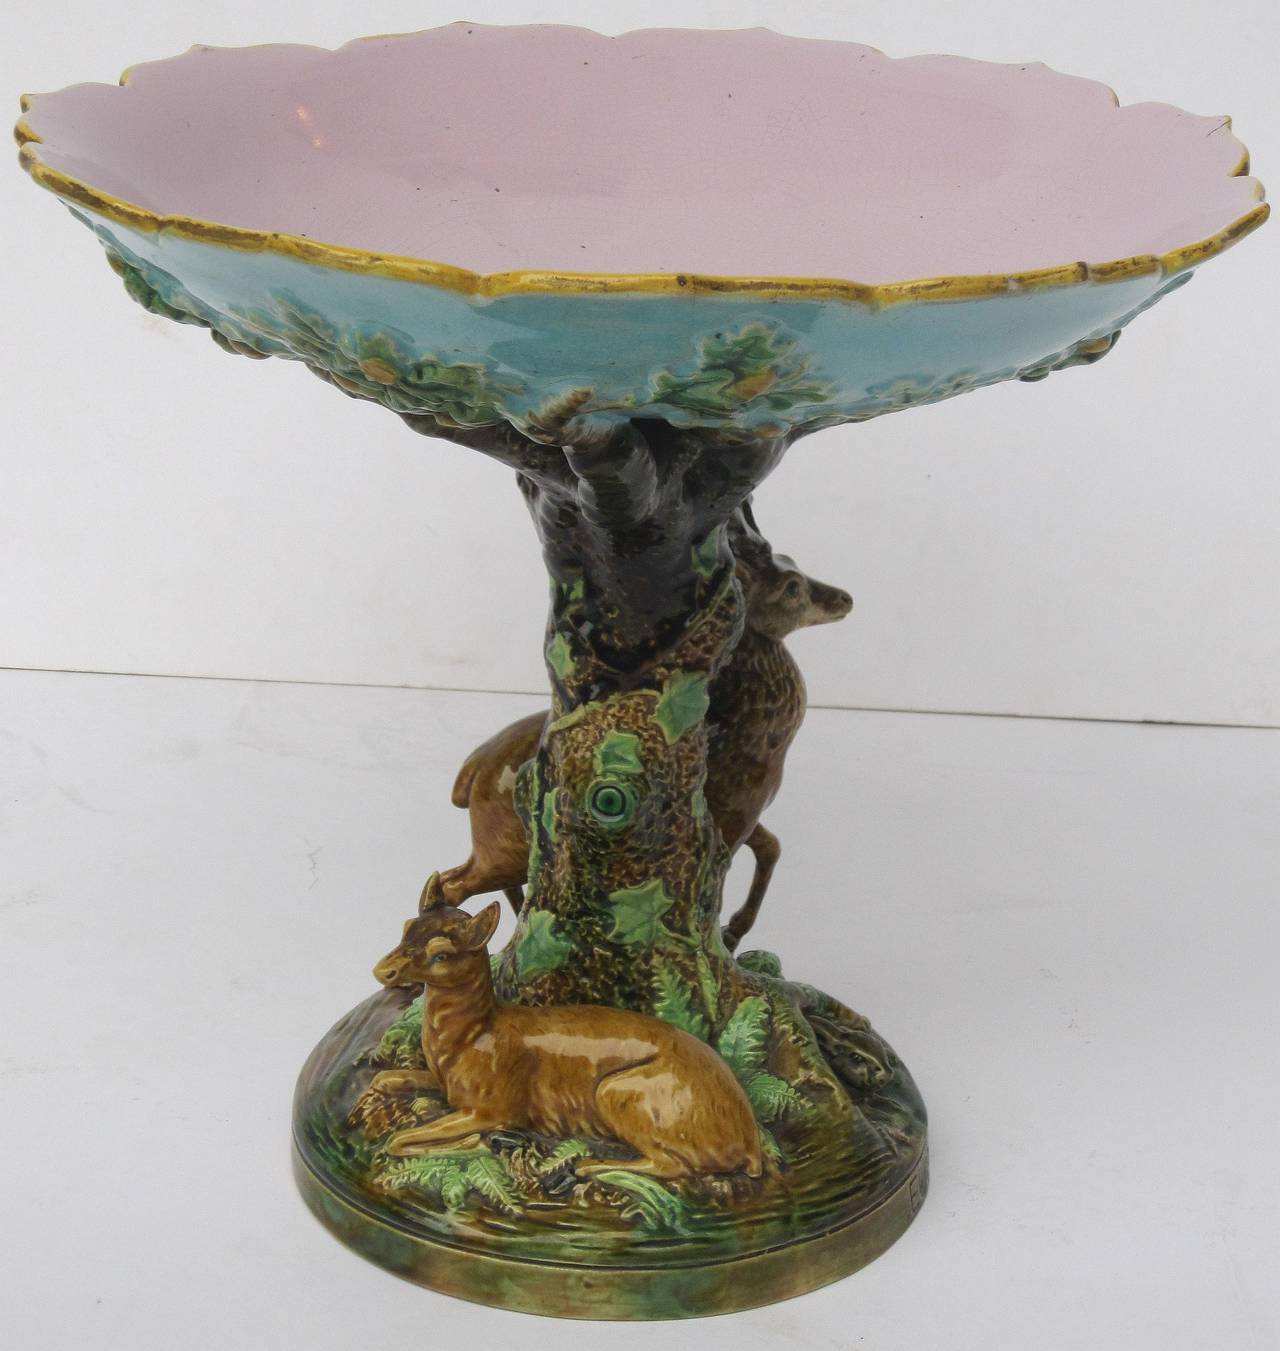 A rare Majolica deer compote (or comport) table center from the Continents series (also called the Continental series) by the celebrated English pottery firm, George Jones. Entitled 